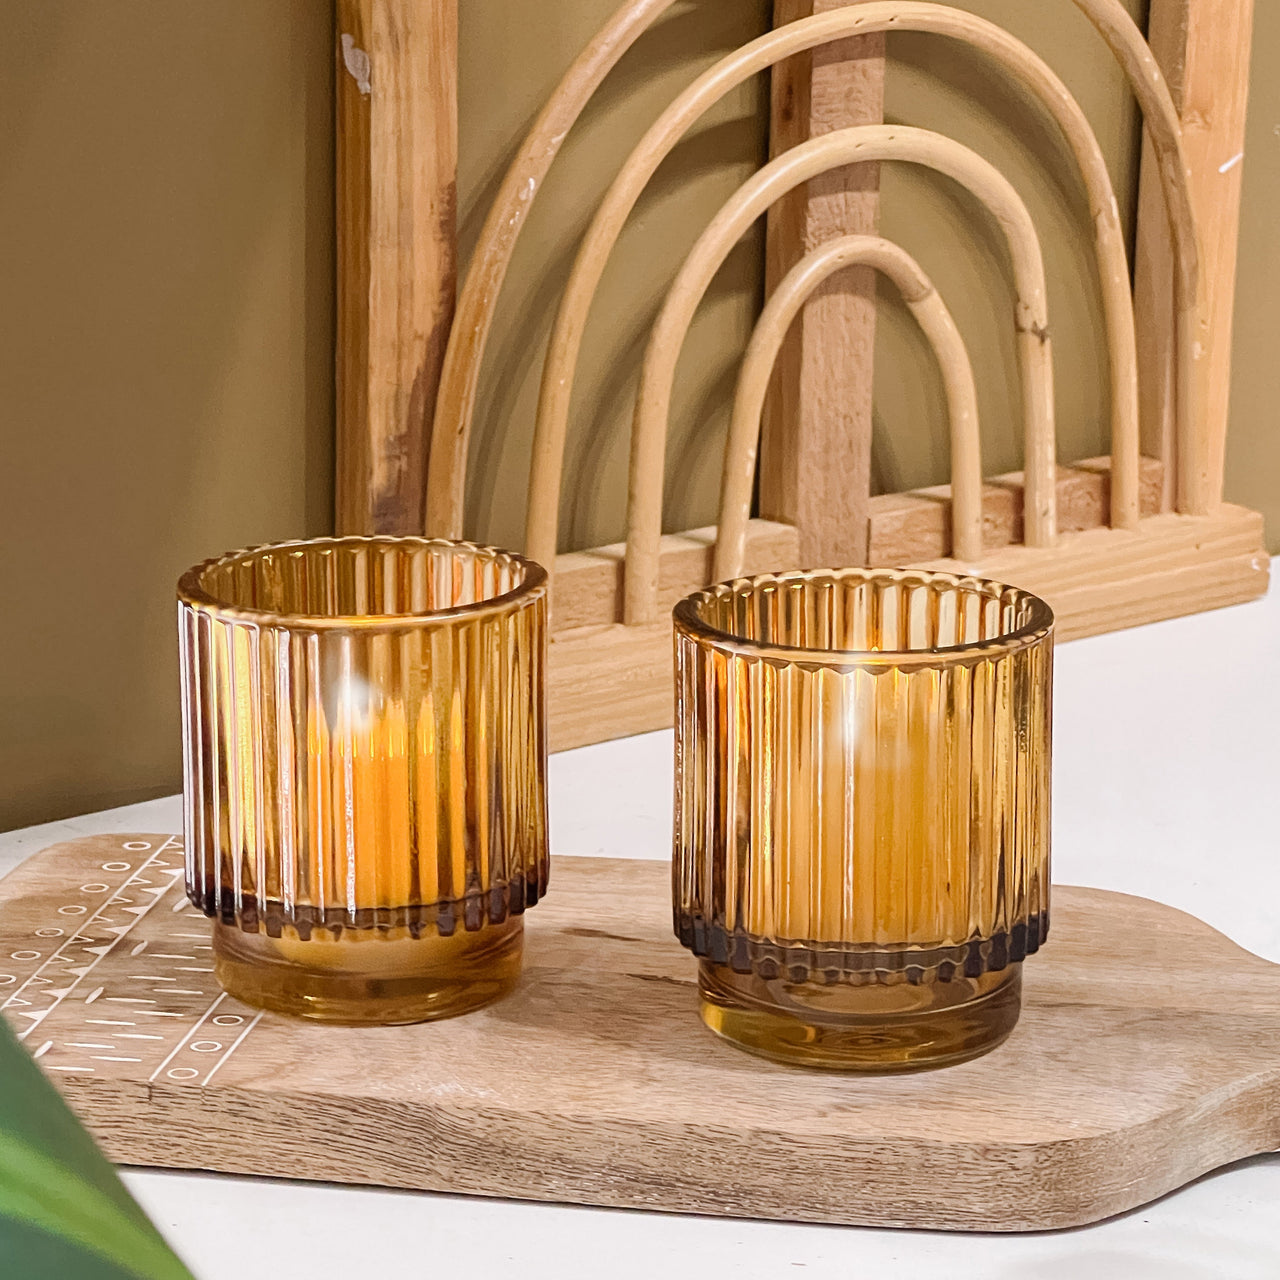 Set of 3 Tea Light Candle Holders Clear Glass Candle Holders. Reusable 